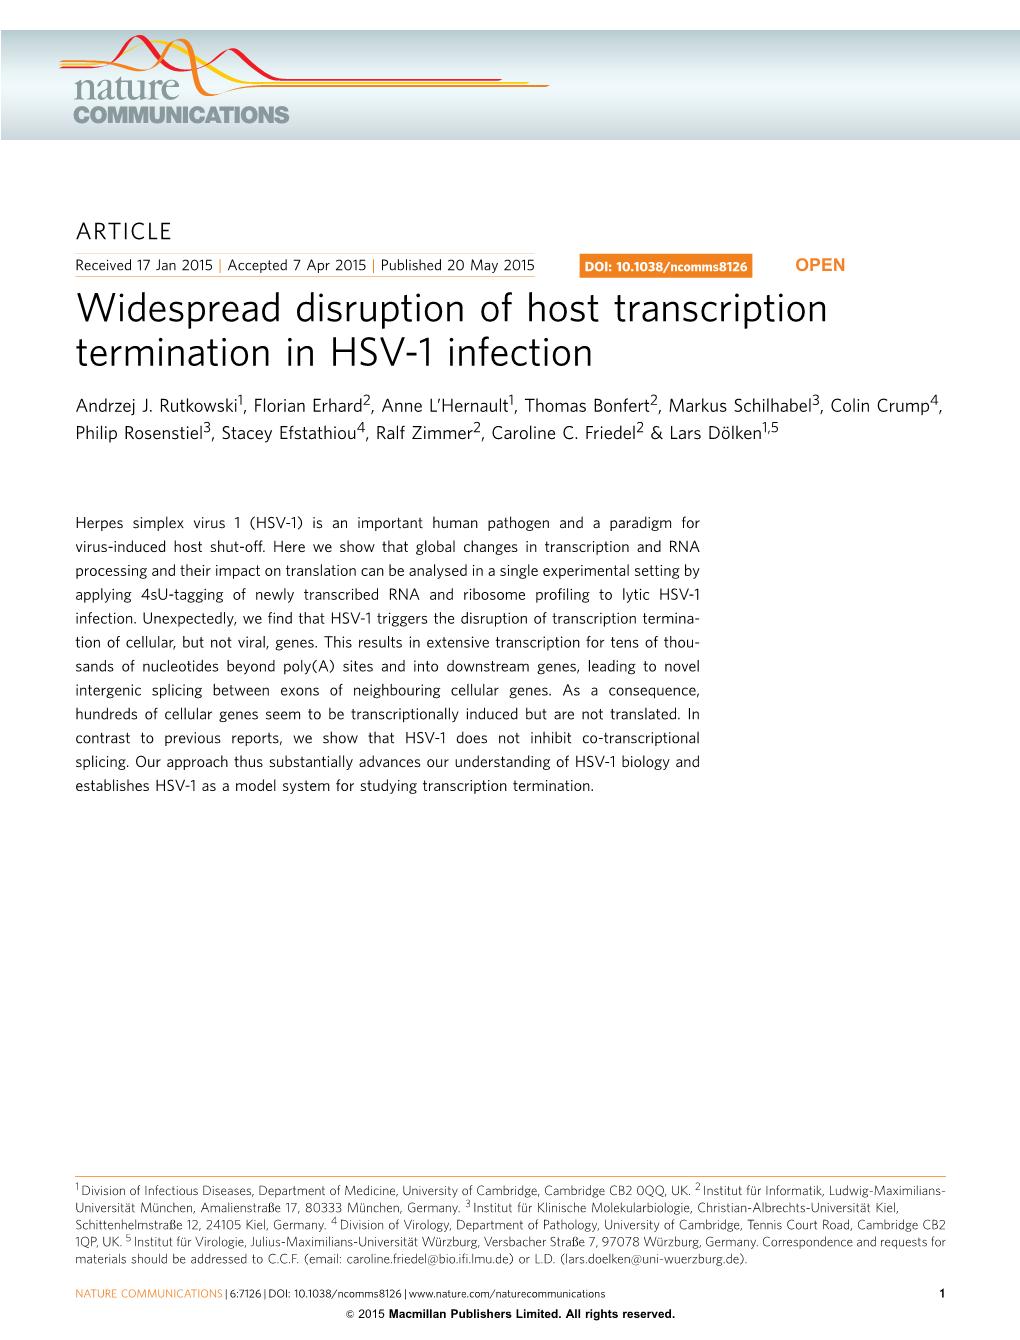 Widespread Disruption of Host Transcription Termination in HSV-1 Infection